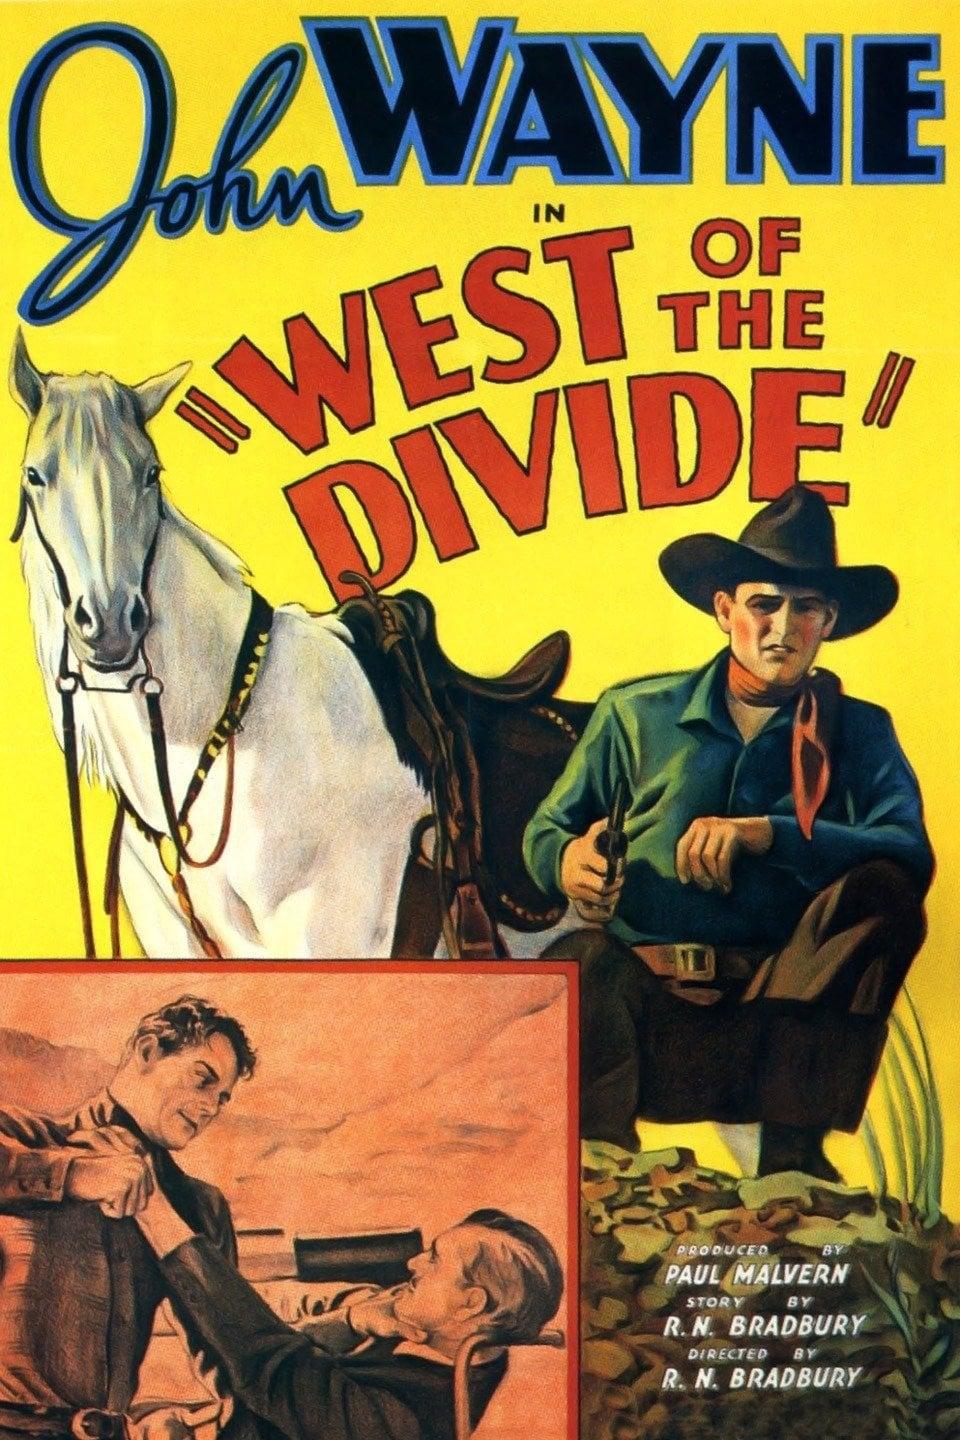 West of the Divide poster